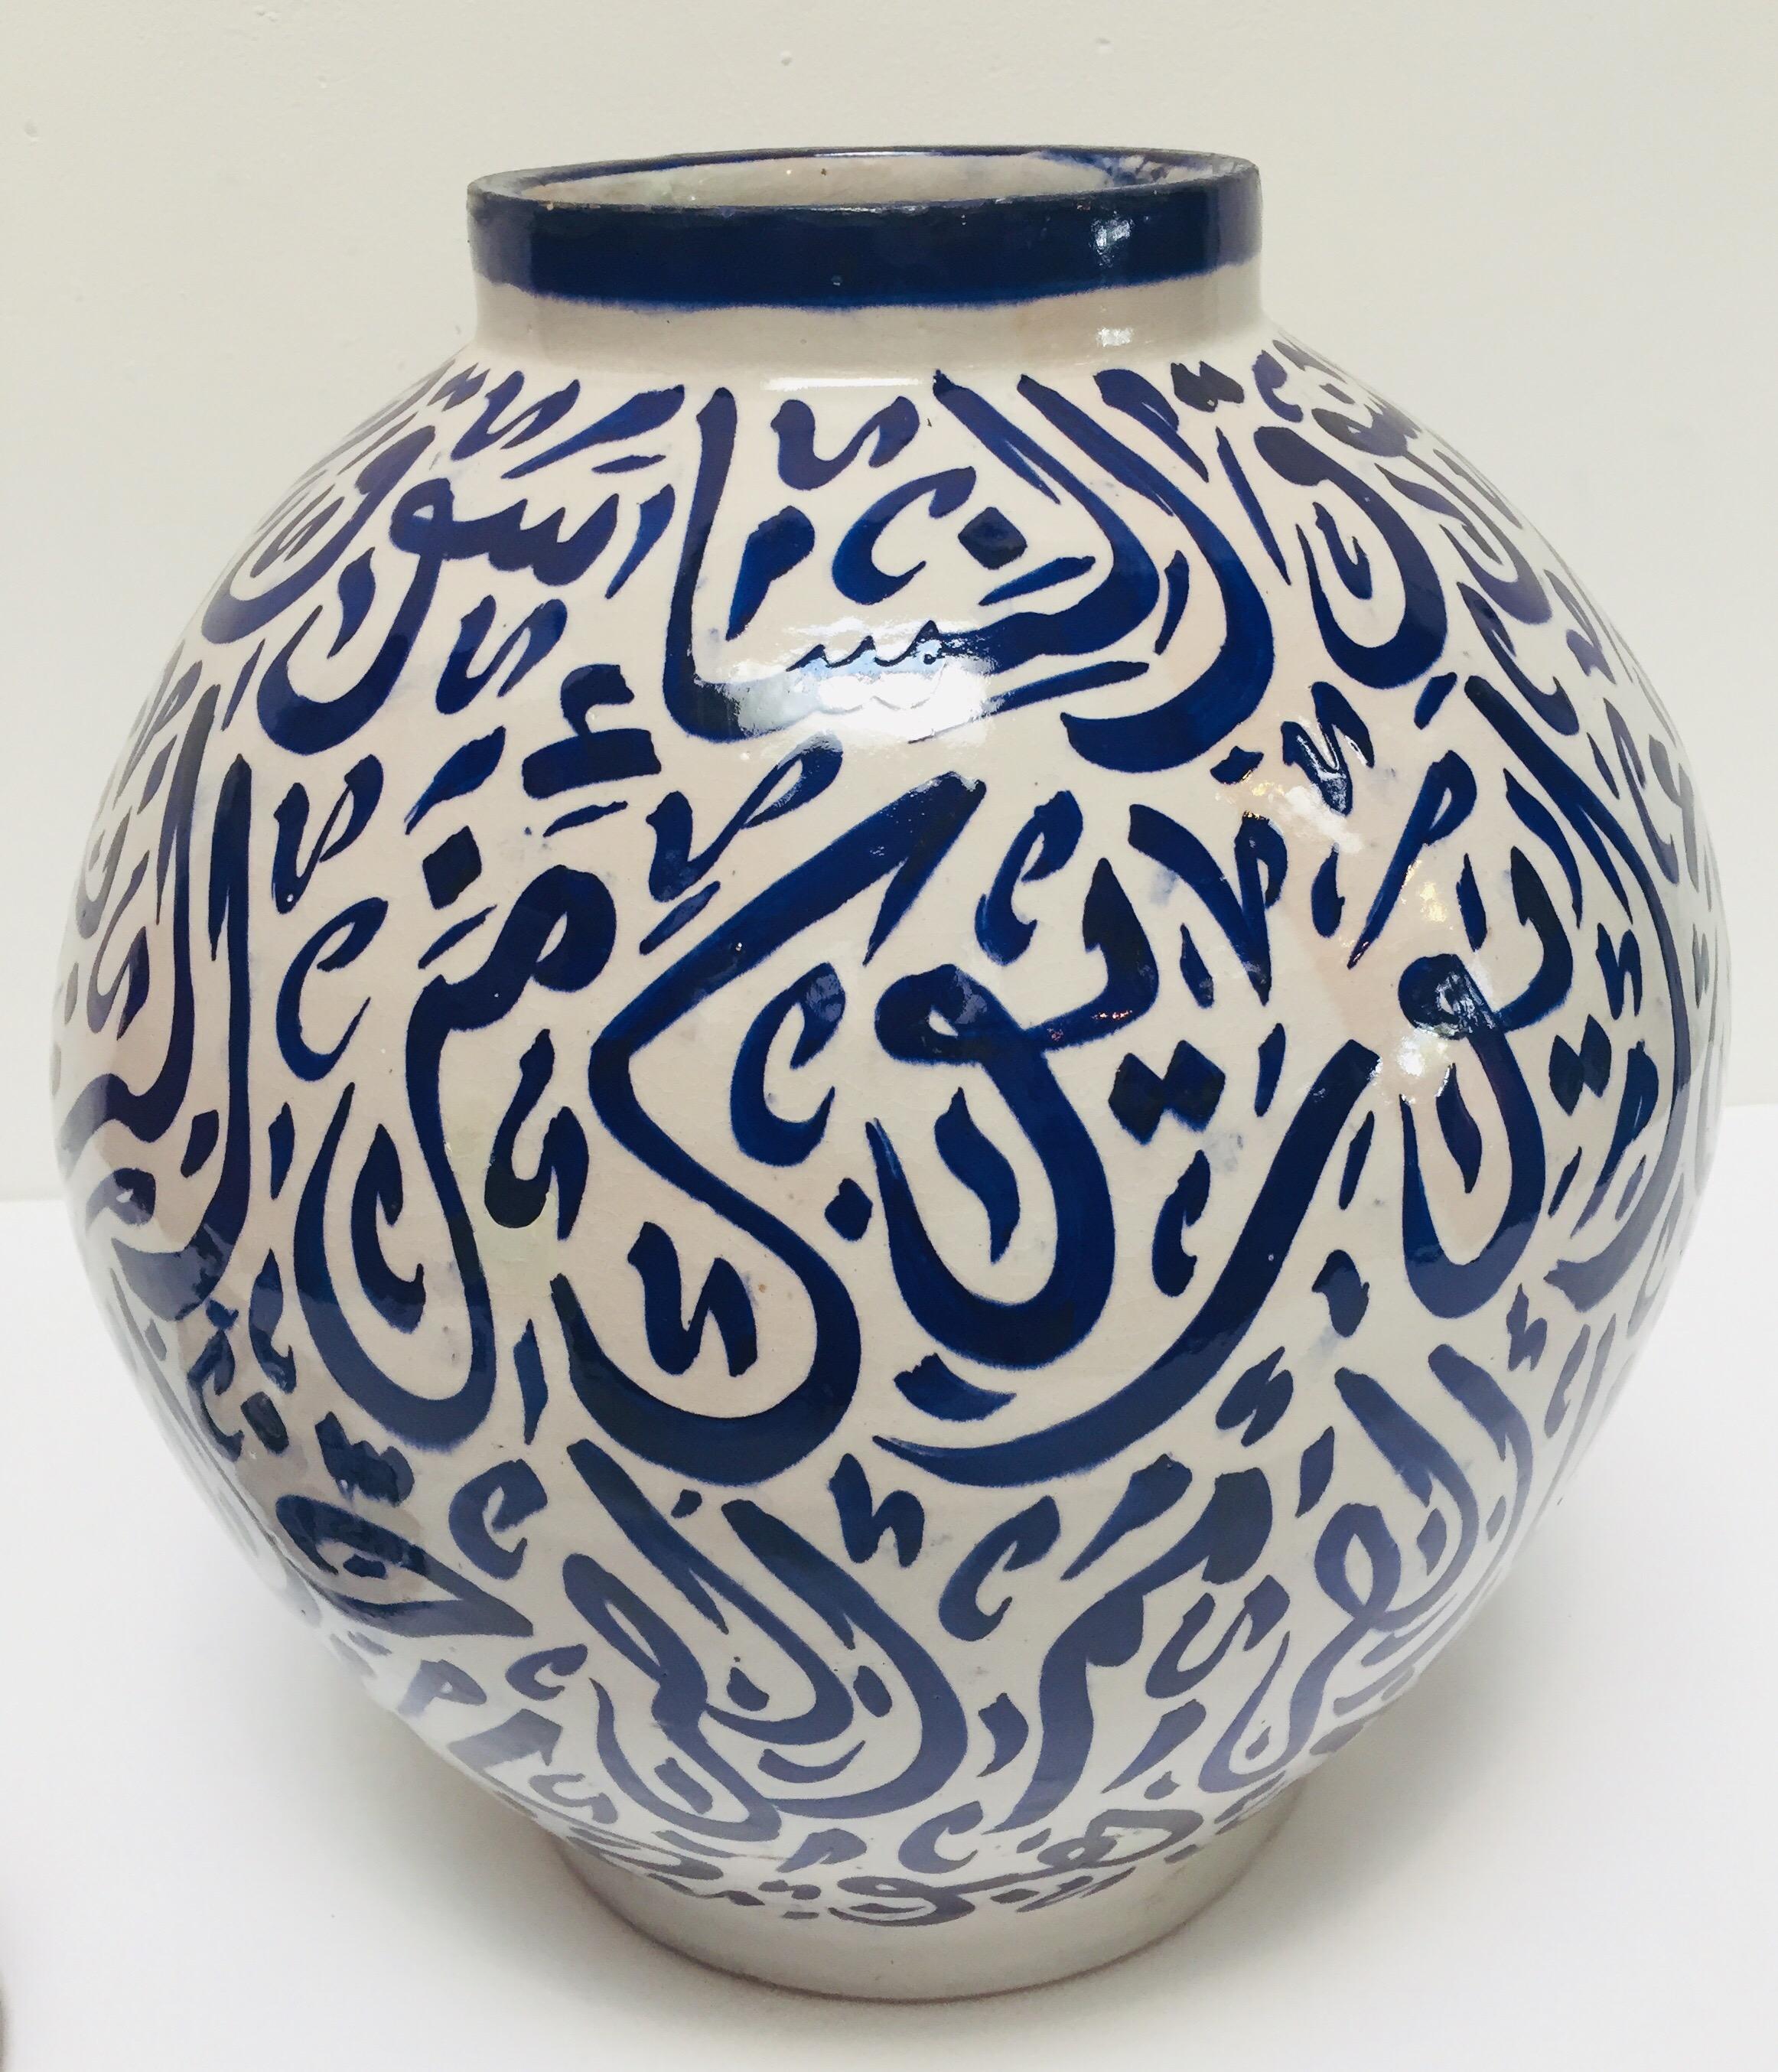 Moroccan Blue Ceramic Lidded Urn with Arabic Calligraphy Writing, Fez For Sale 5